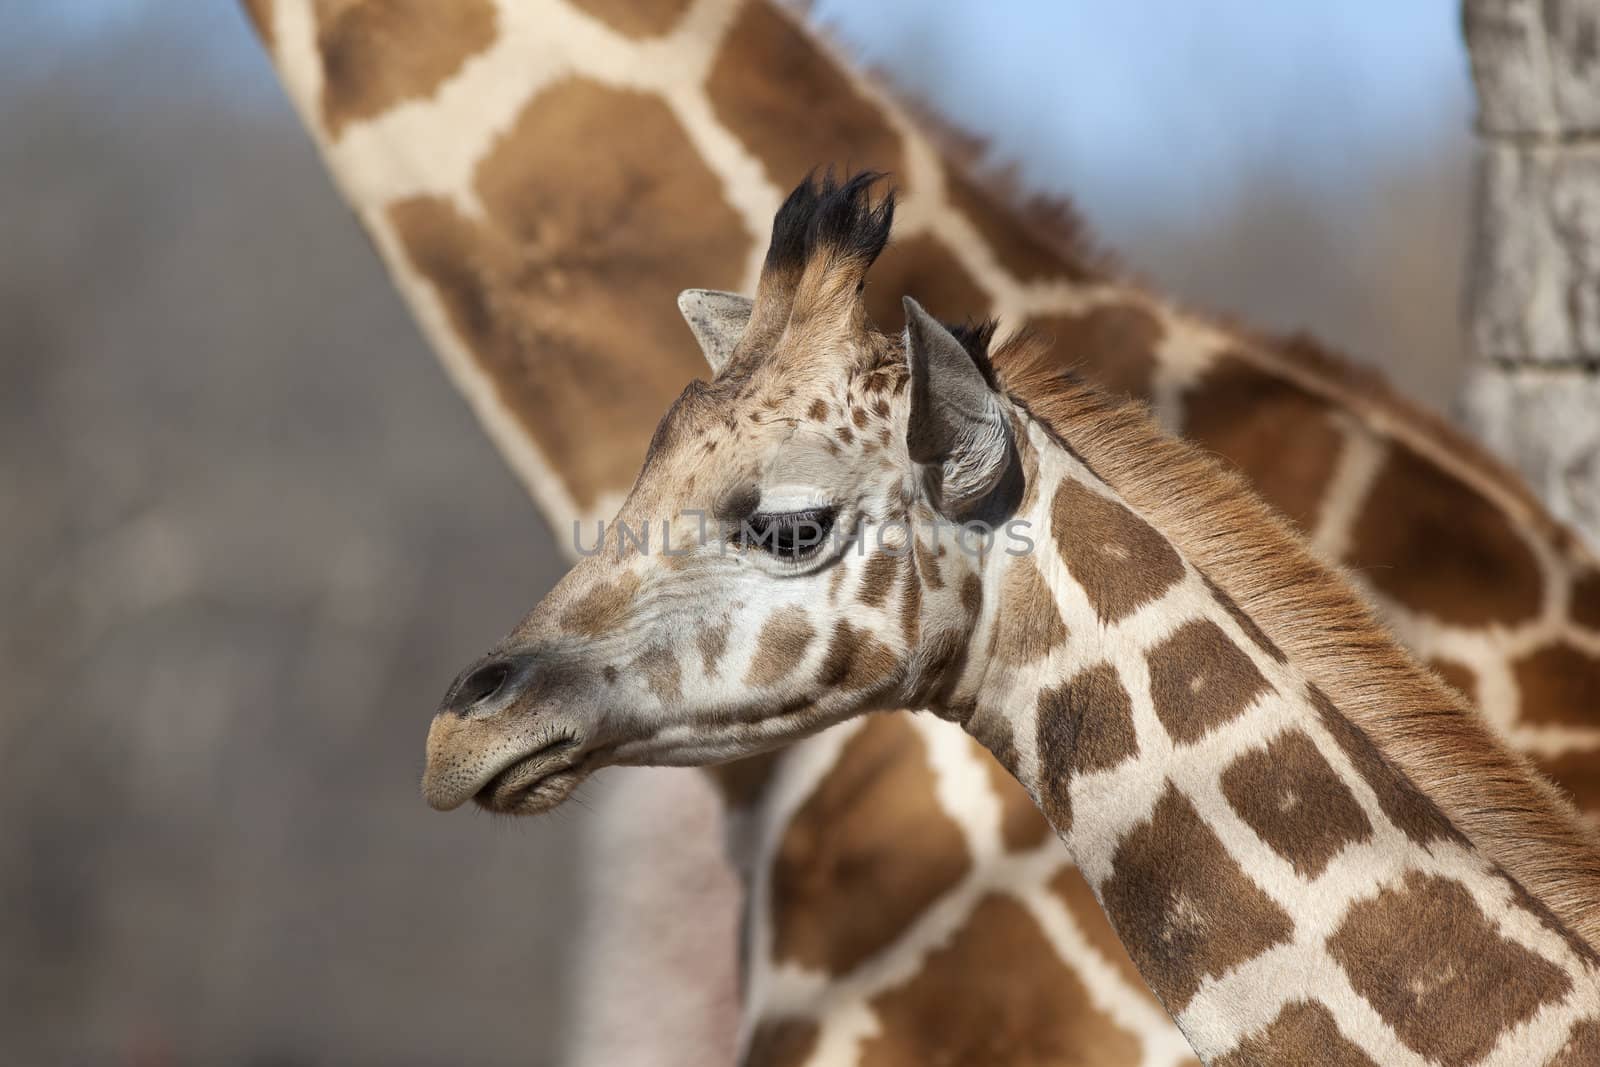 A close up shot of a young giraffe (Giraffa camelopardalis) with its mother just behind.